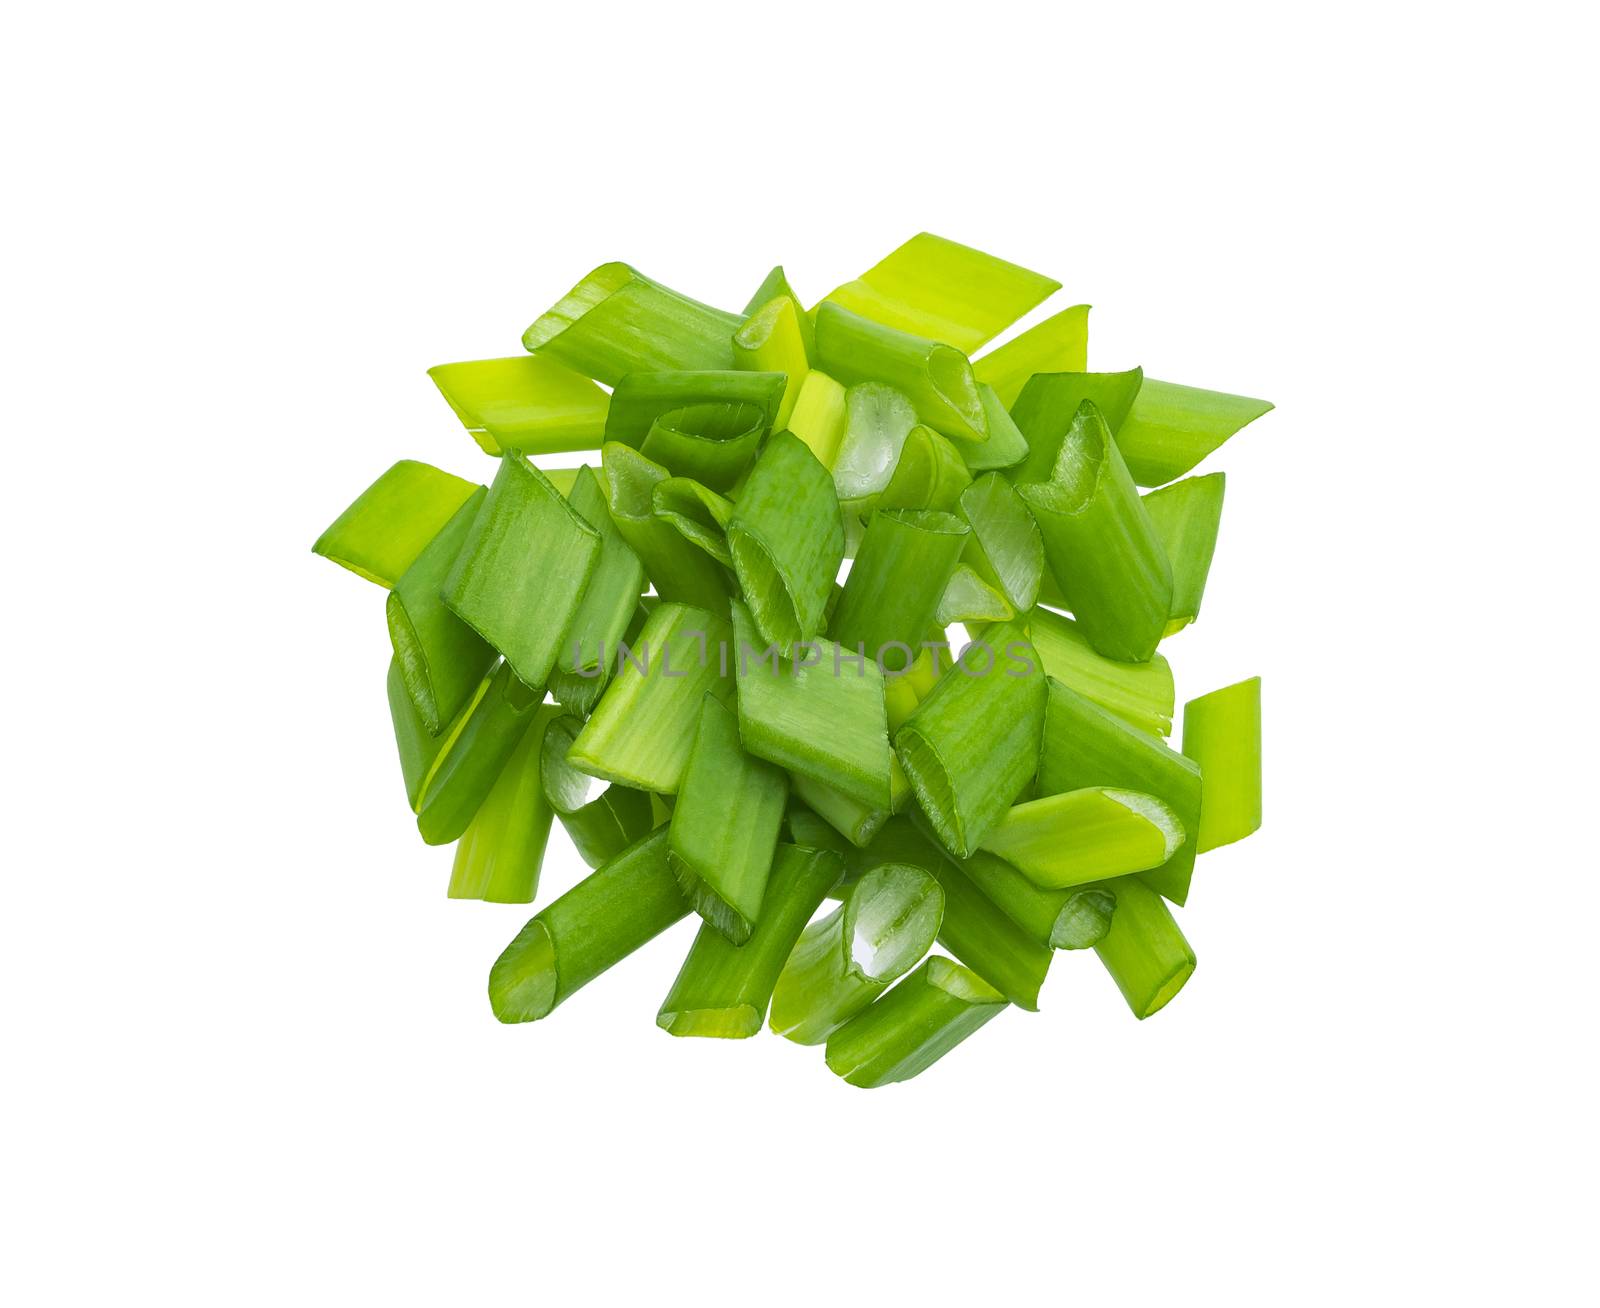 Chopped chives, fresh green onions isolated on white background, top view by xamtiw